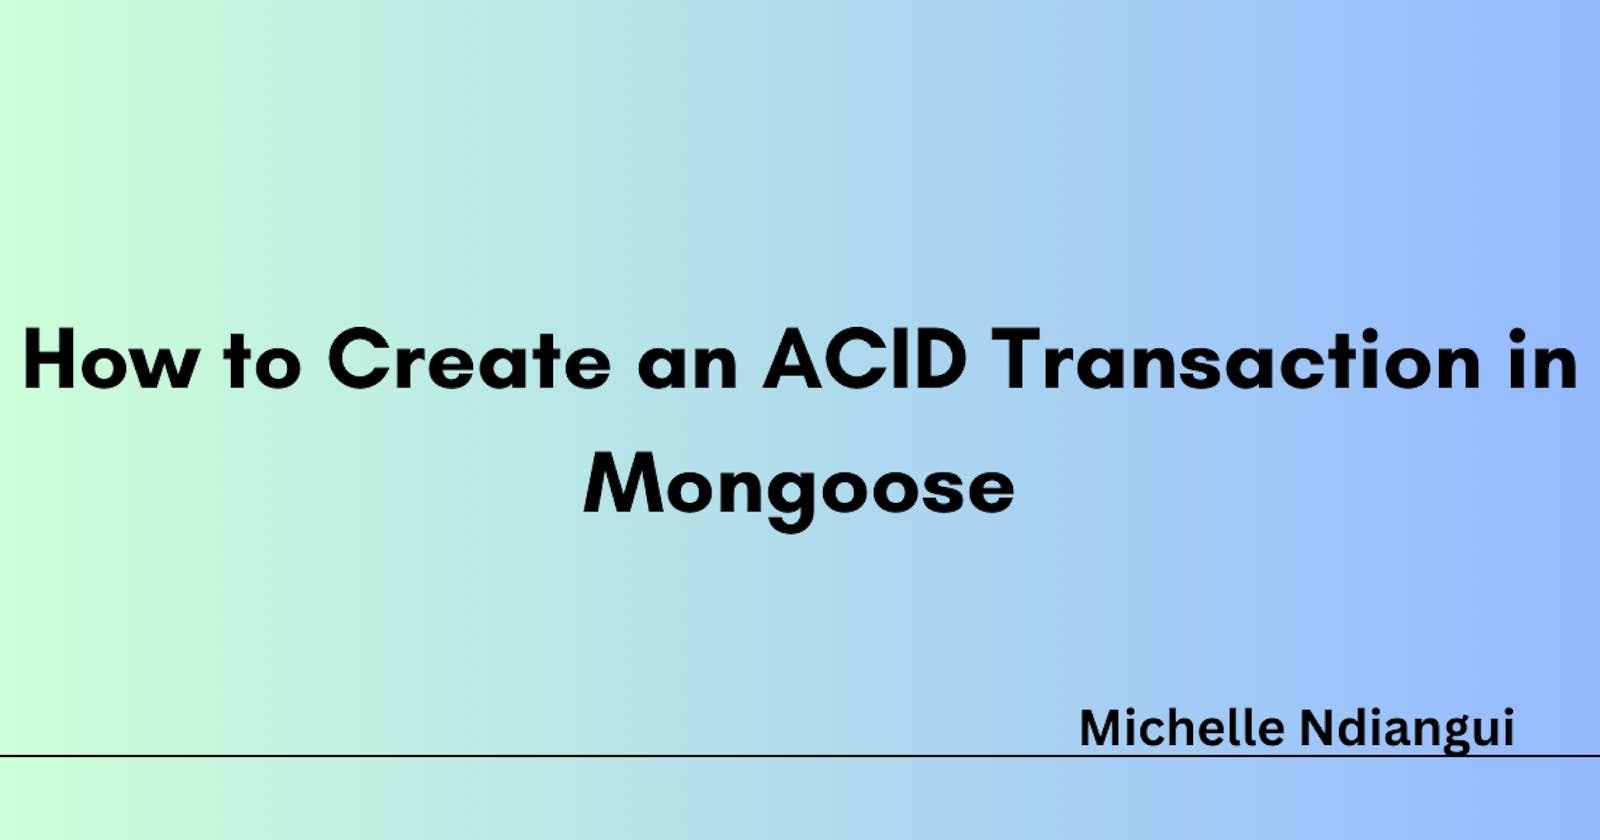 How to Create an ACID Transaction in Mongoose